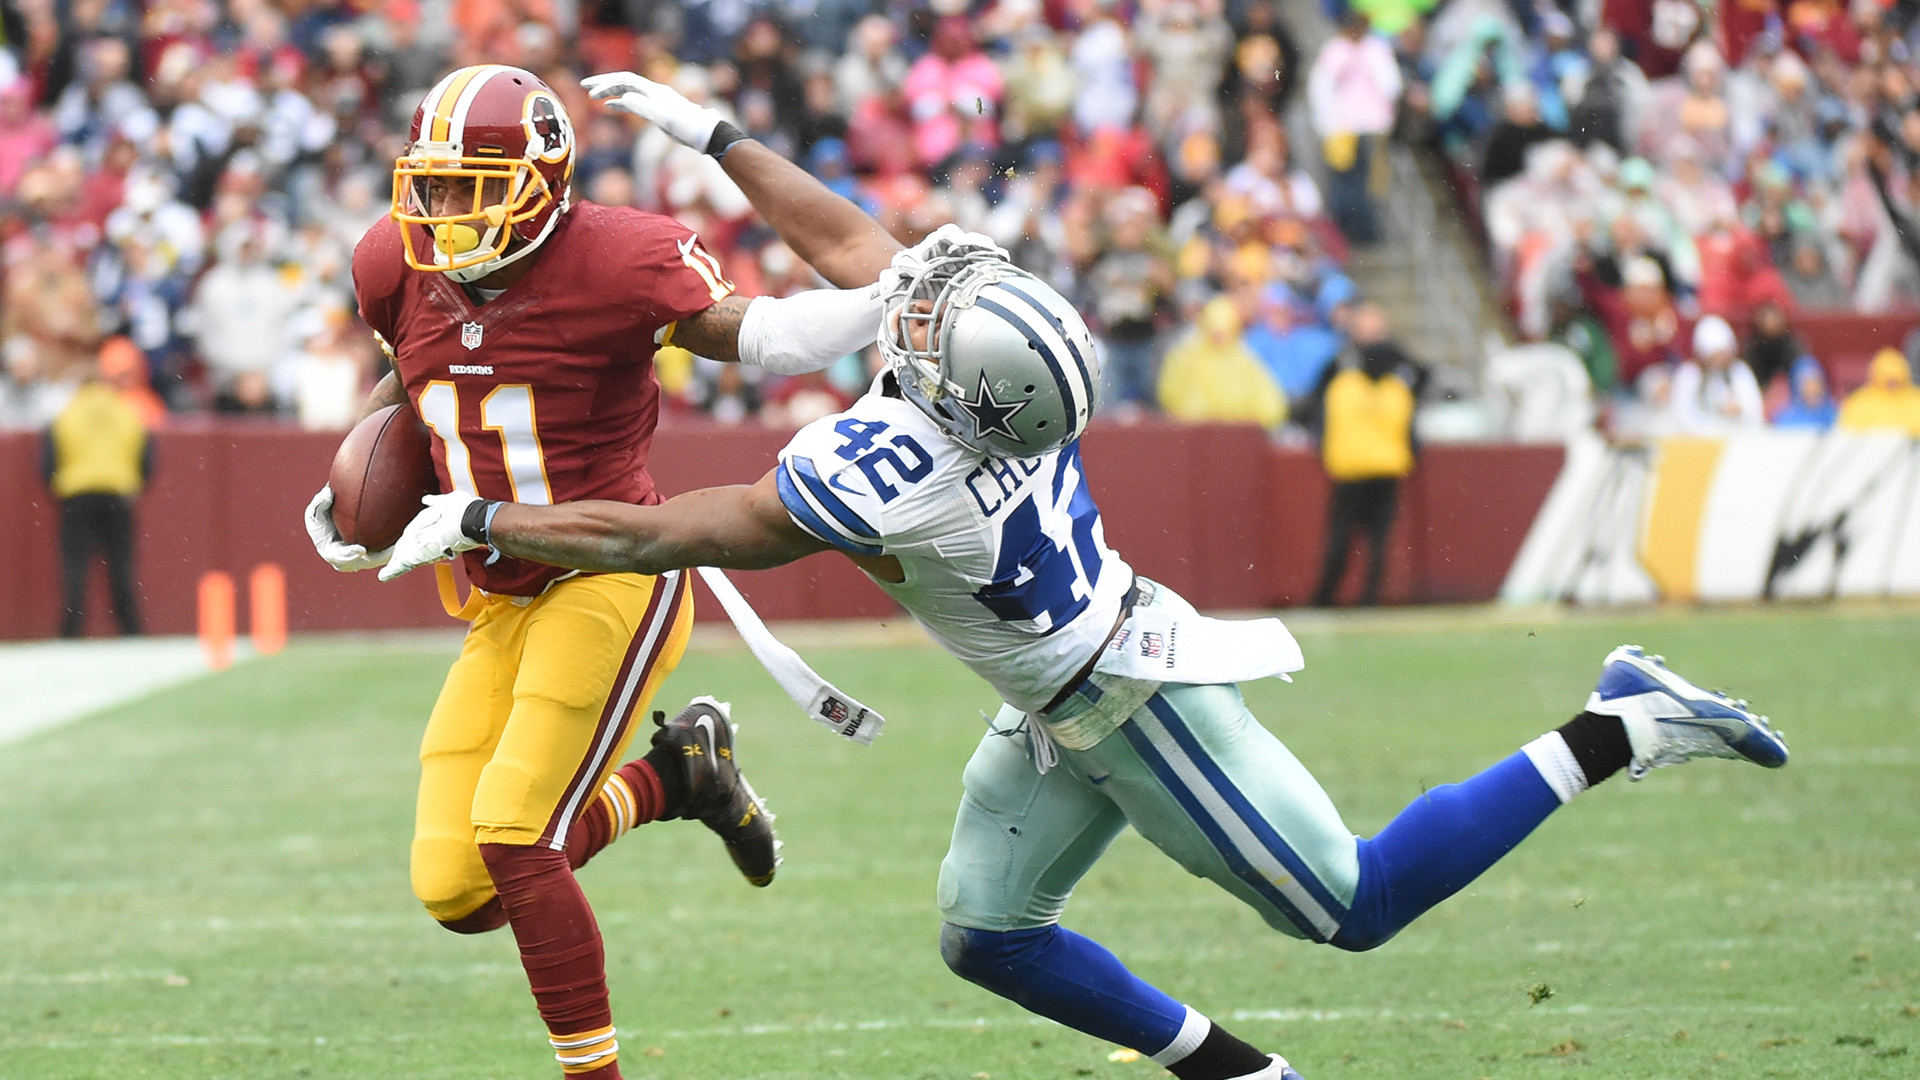 1920x1080 Why the Redskins are not the NFC East's team to beat - The Washington Post